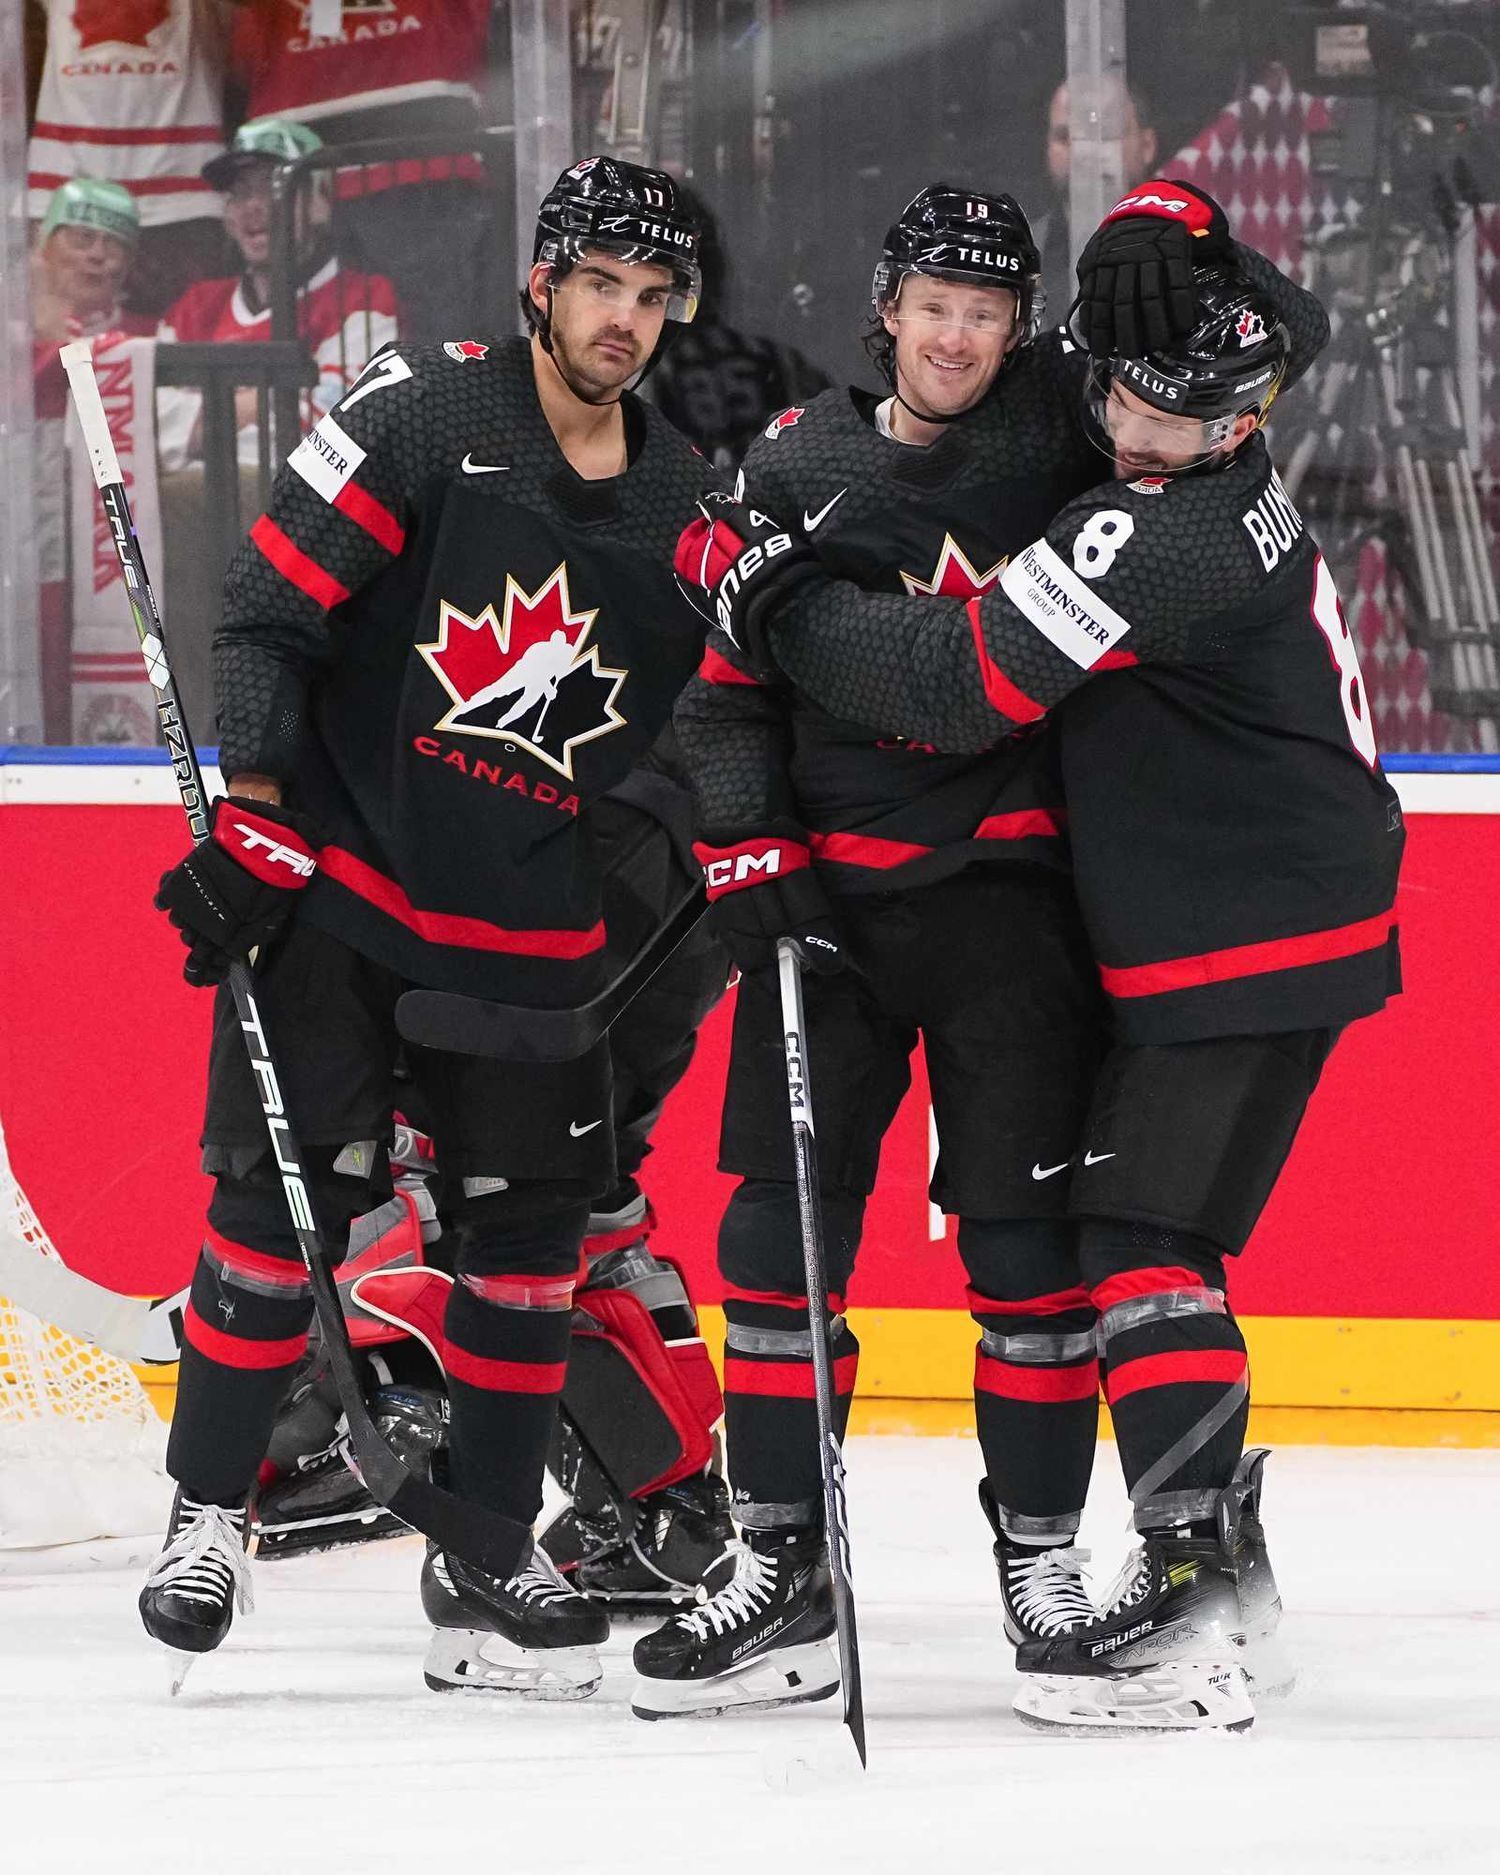 Canada, winning 6-1 at the World Cup of Hockey, almost lost to Austria in regulation time. Video